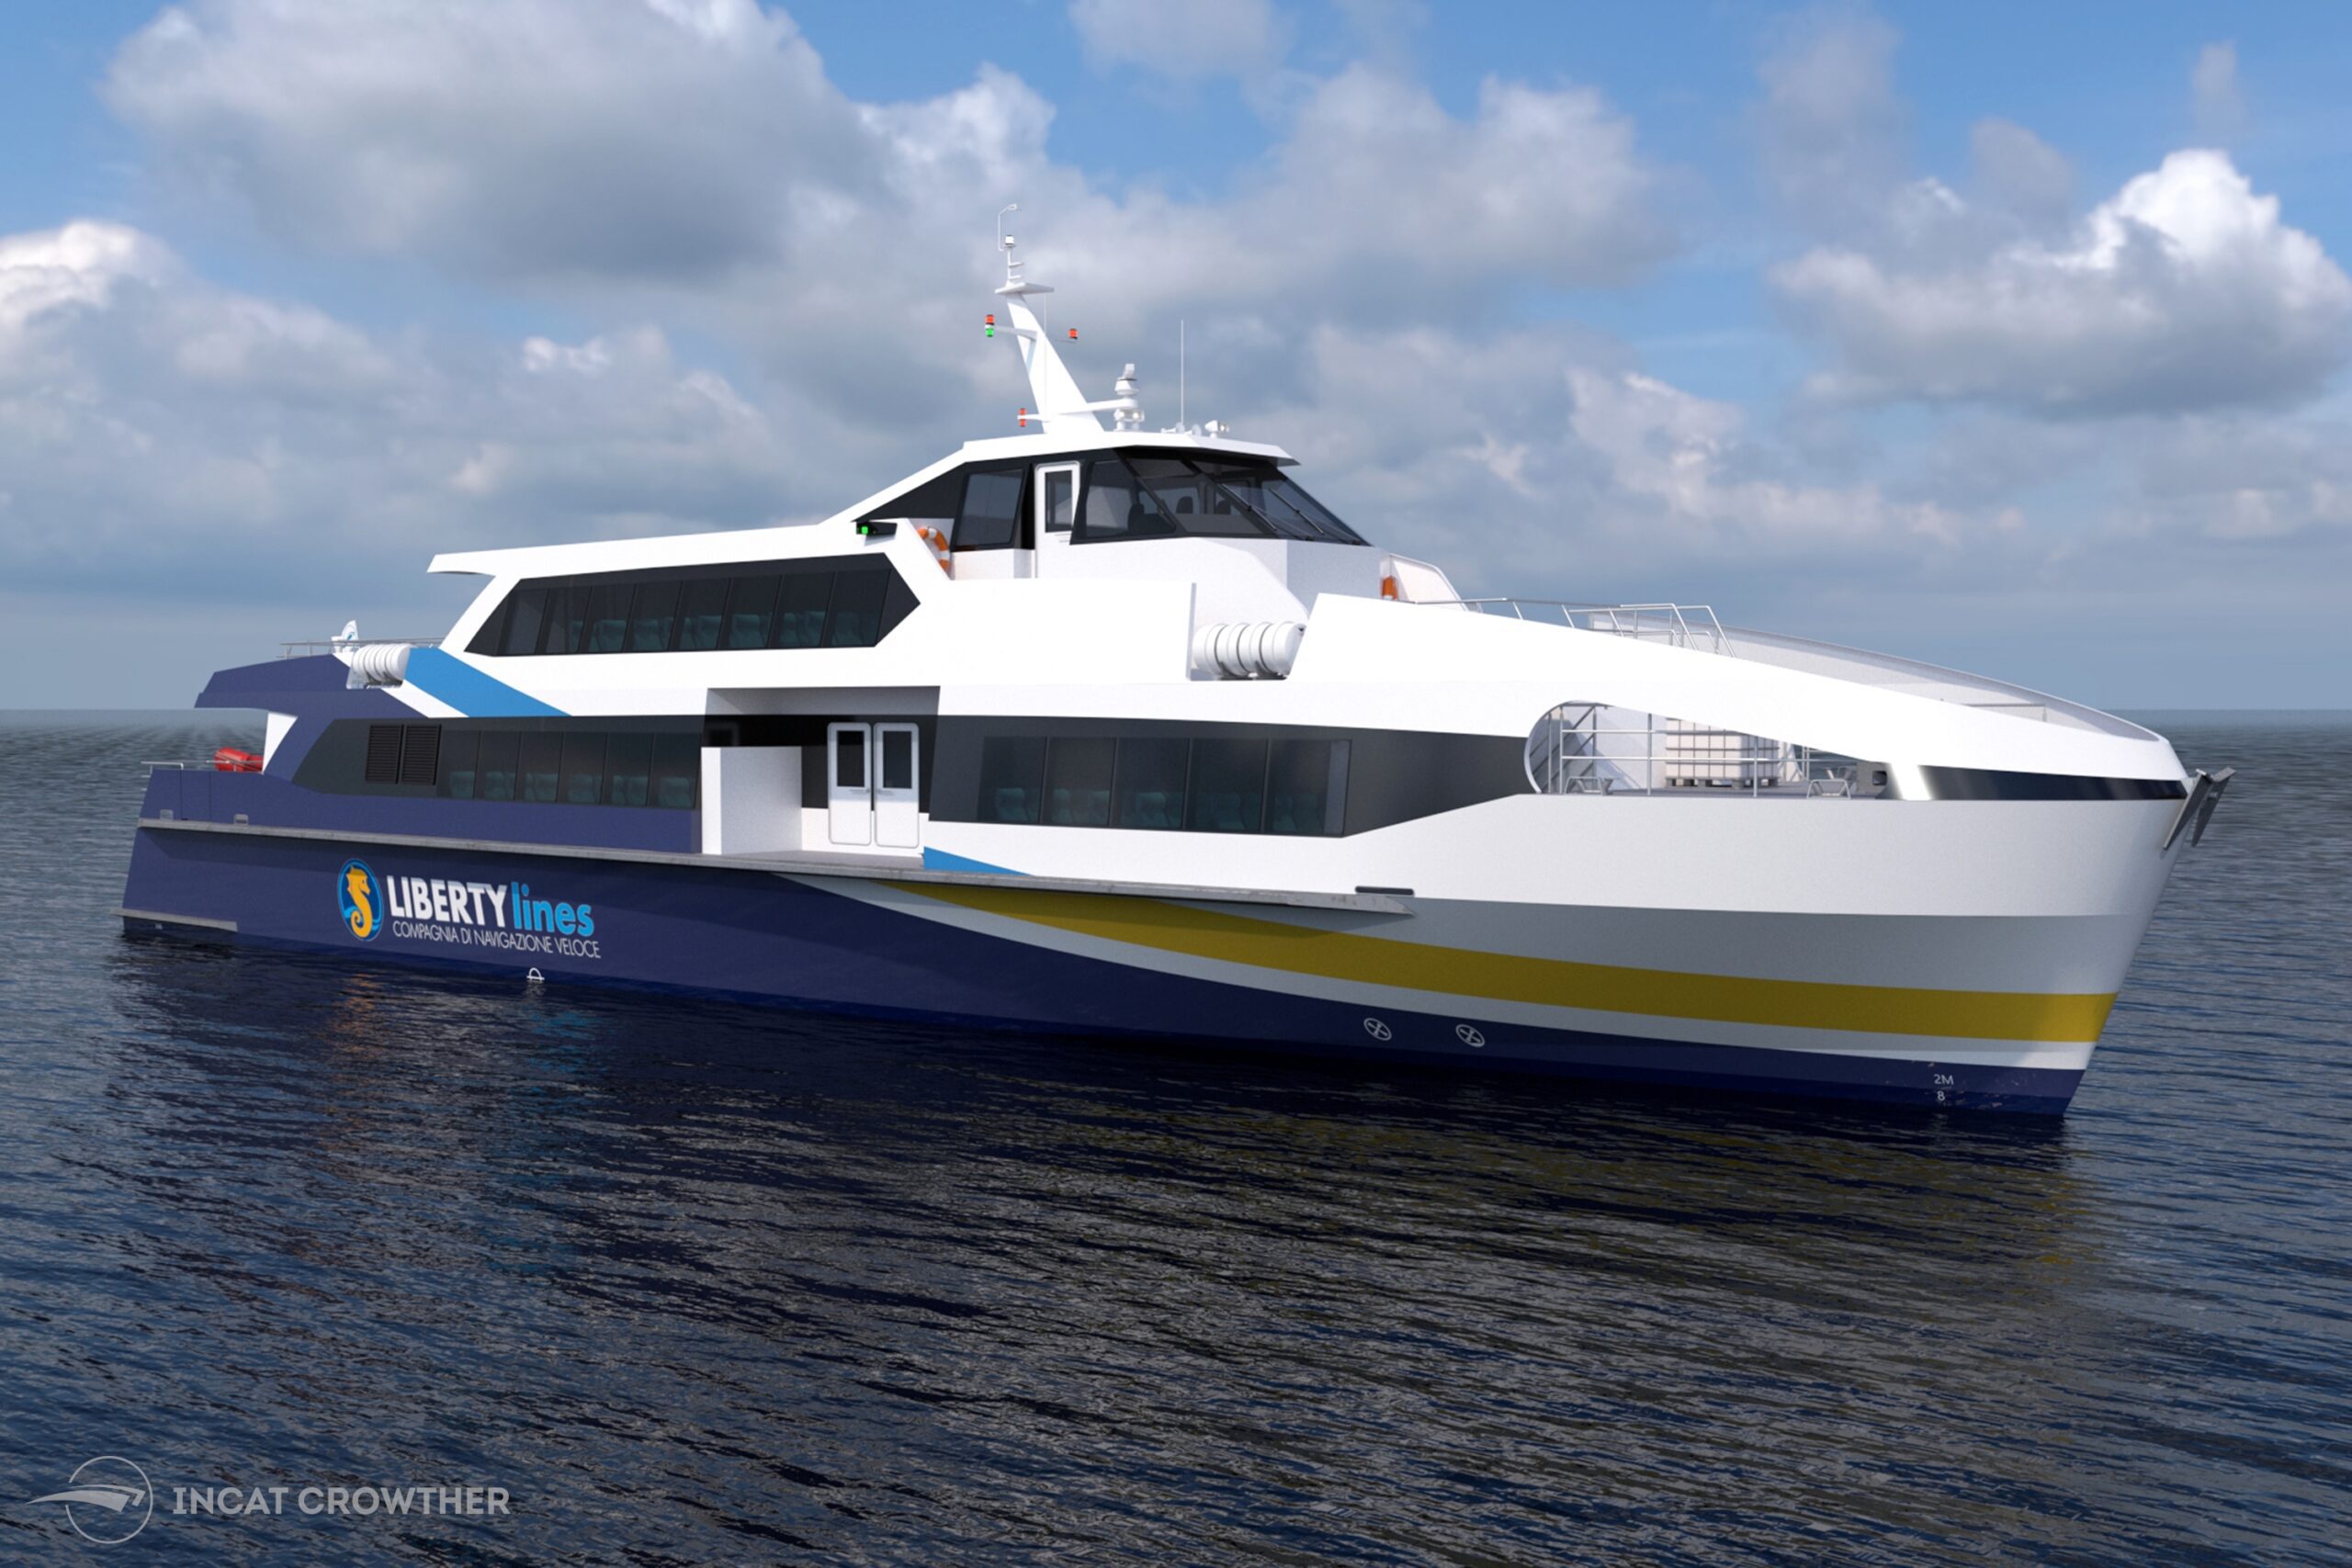 Liberty Lines’ Hybrid Ferry Order at Astilleros Armon Expands to Twelve